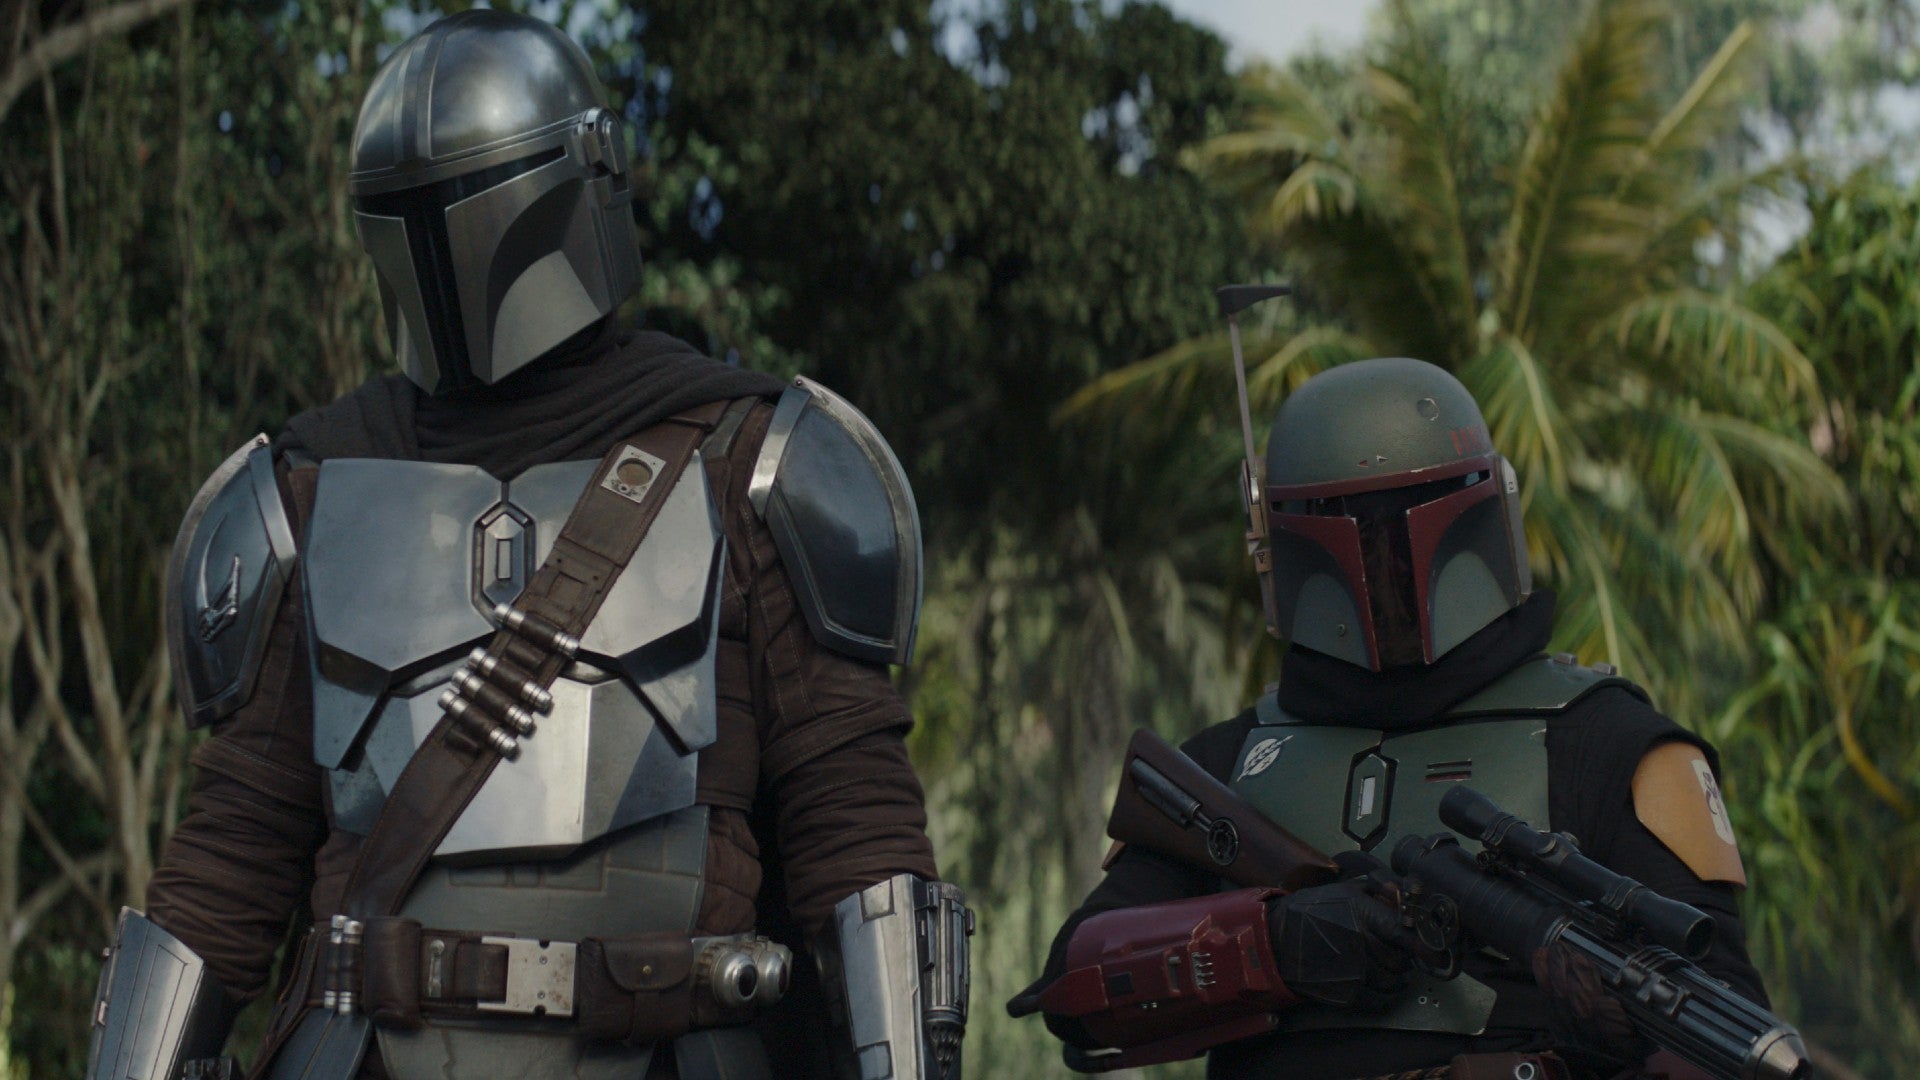 Mandalorian 3 season and Boba Fett book is a separate show, in production now